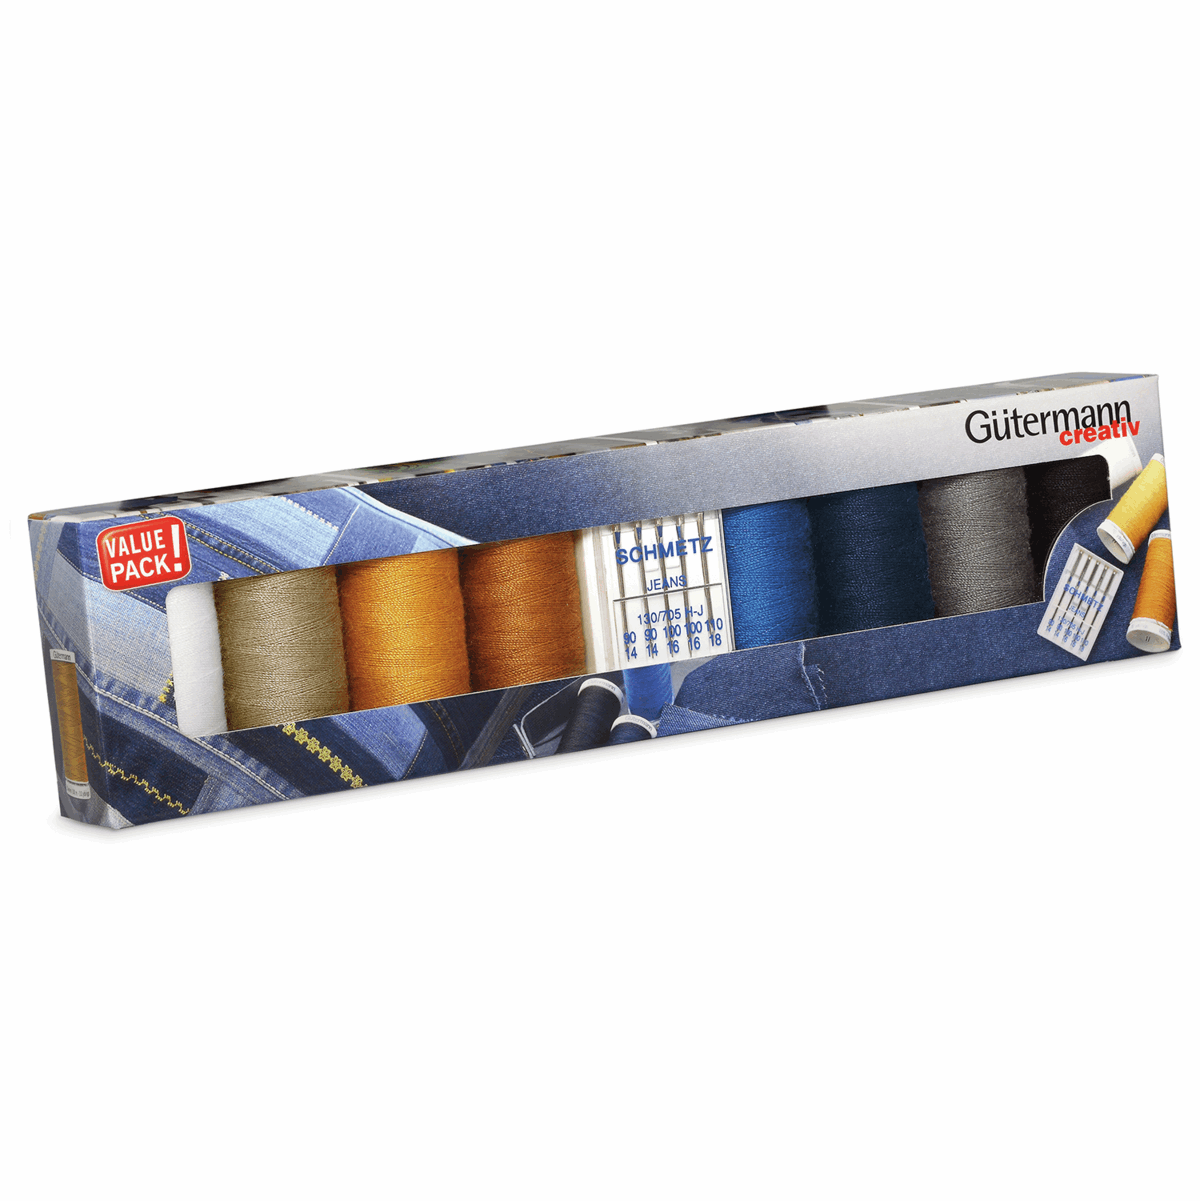 Gutermann Professional Jeans Thread set with Needles from Jaycotts Sewing Supplies